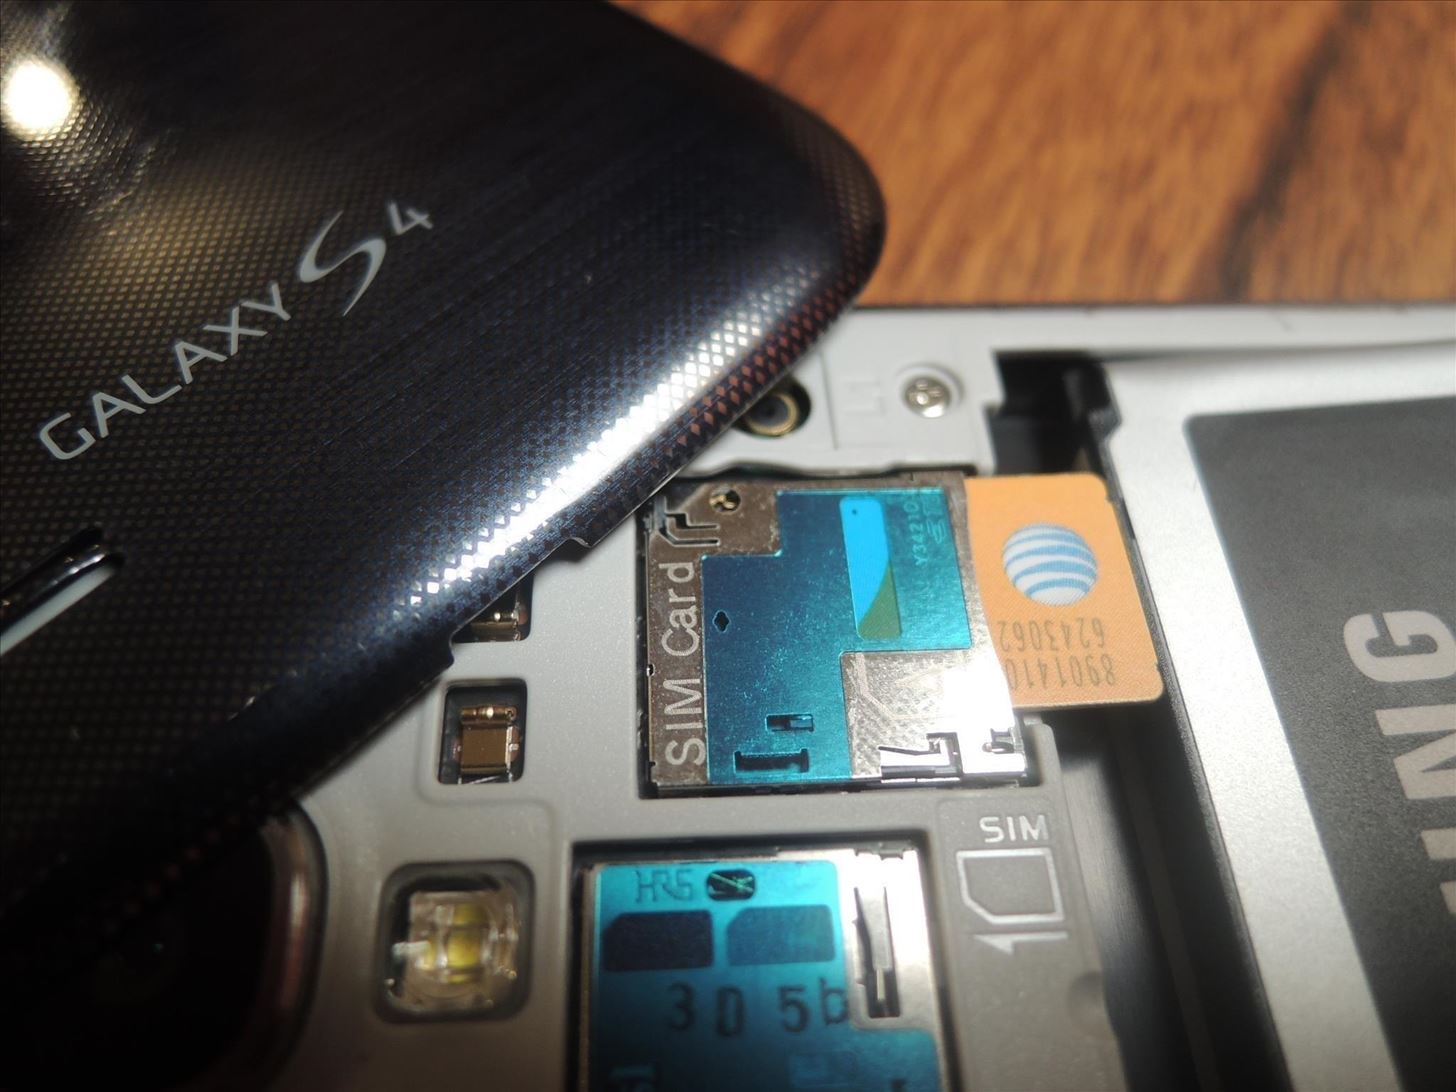 entering-unlock-code-without-sim-card-on-samsung-a-comprehensive-guide